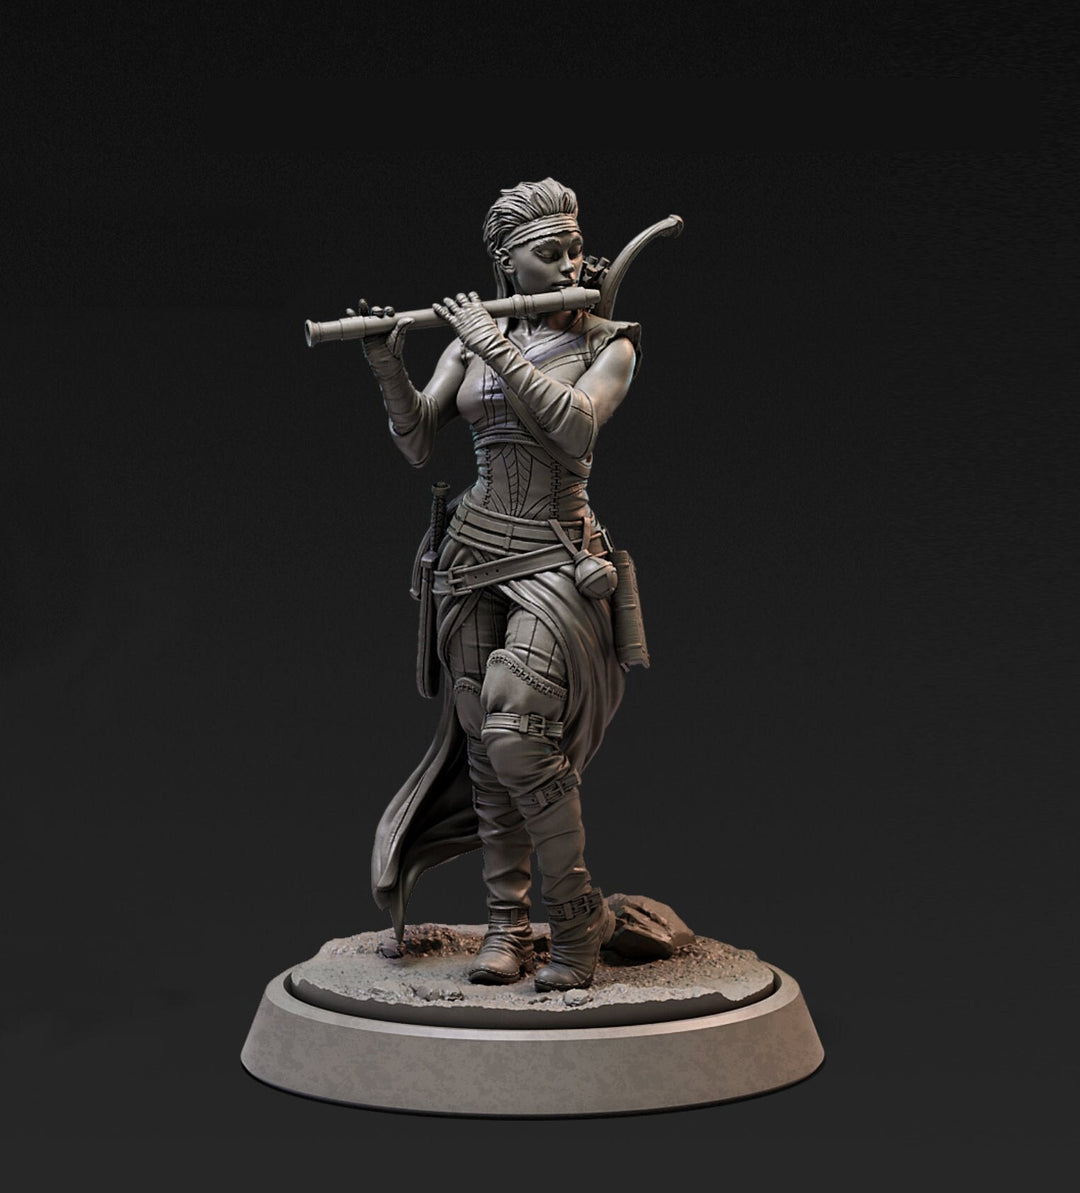 Natasha Blaine, Human Bard | 32mm or 75mm Fantasy Miniature | DnD Miniature | Dungeons and Dragons | Tabletop | Pathfinder | Role Playing